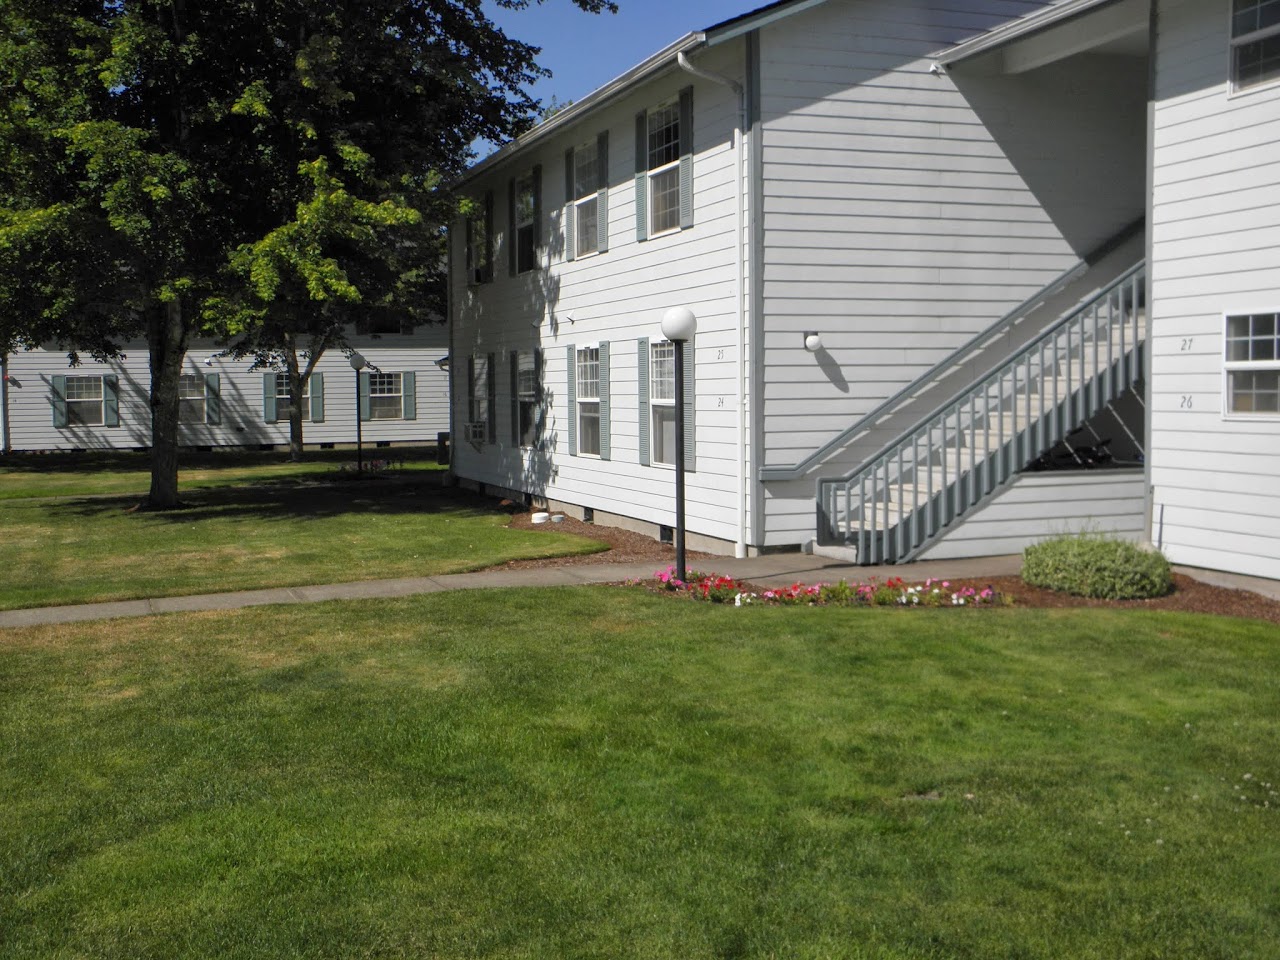 Photo of FRANKLIN PLACE APTS at 317 ECOLS ST S MONMOUTH, OR 97361